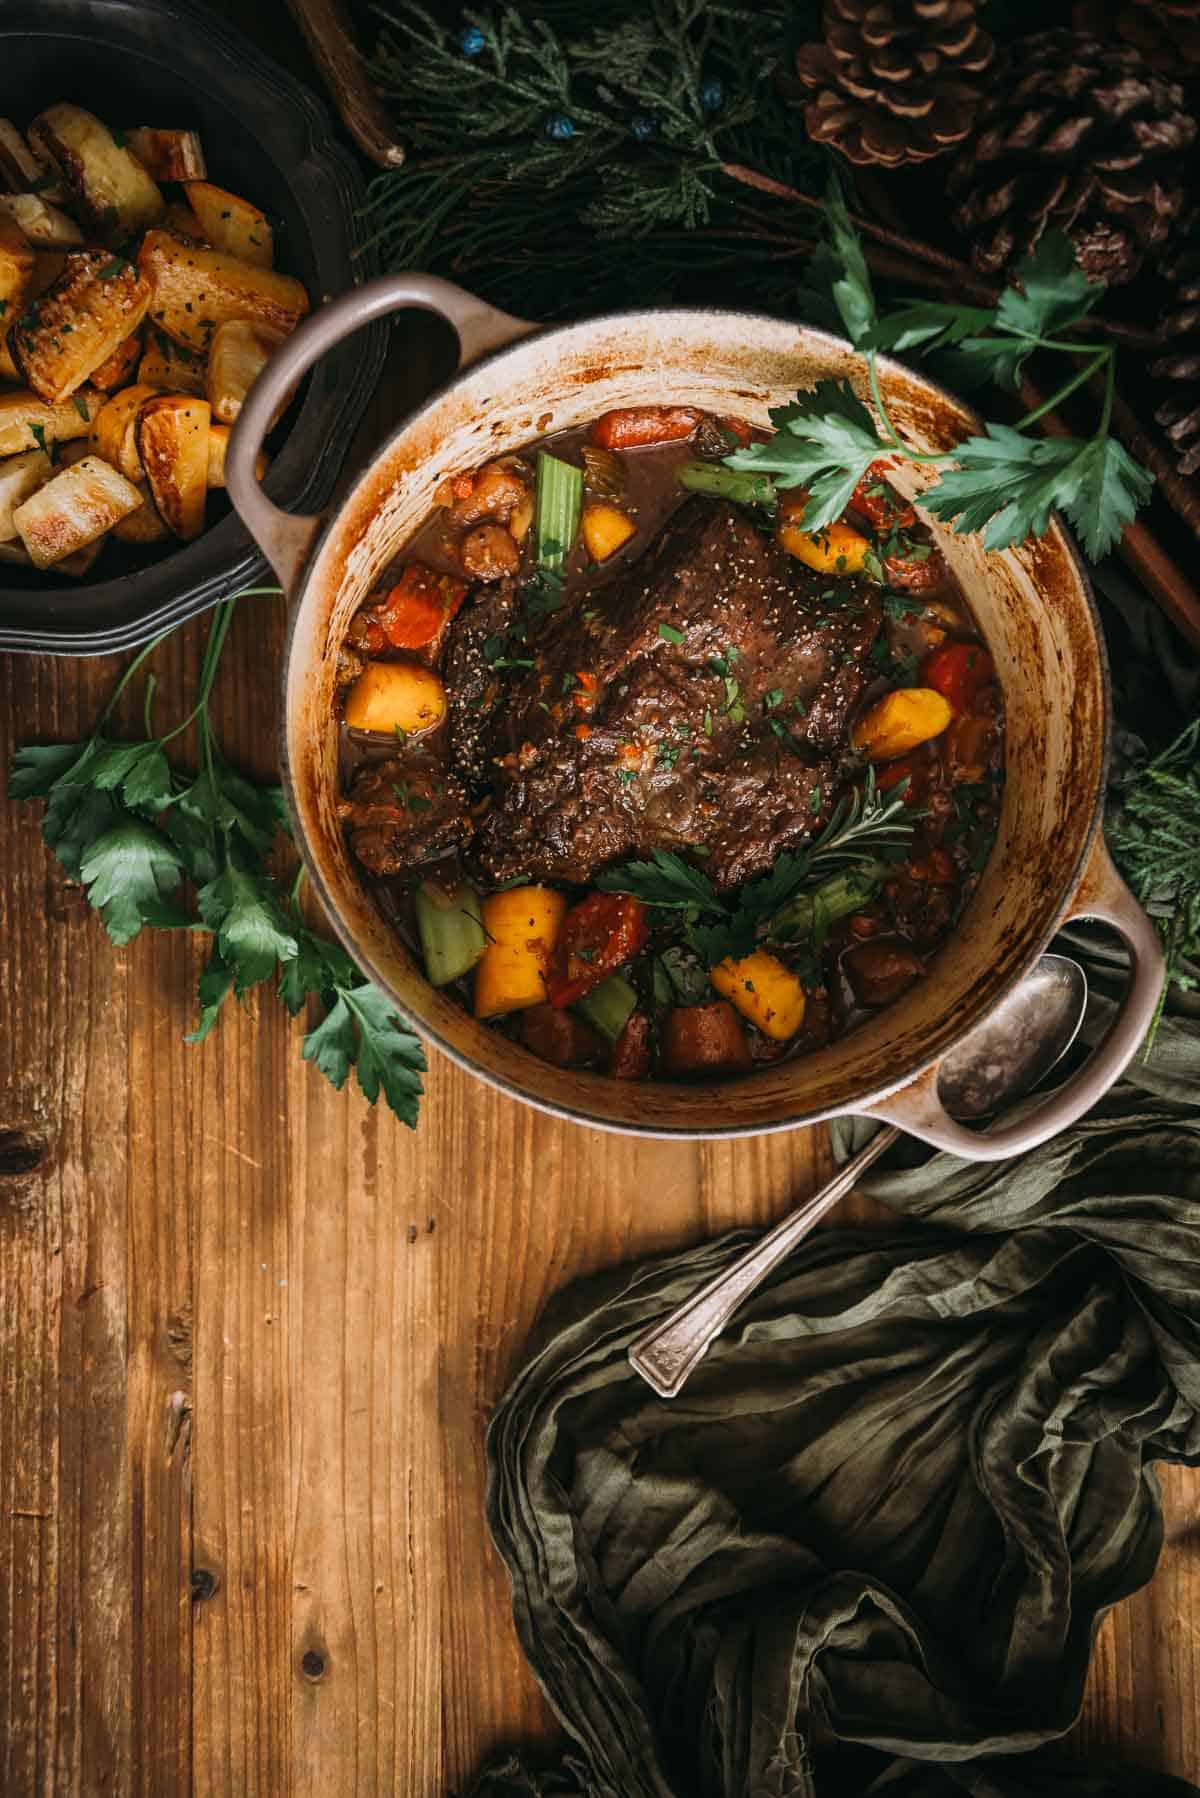 An overhead shot of a Dutch oven with a pot roast and vegetables on a wooden table.